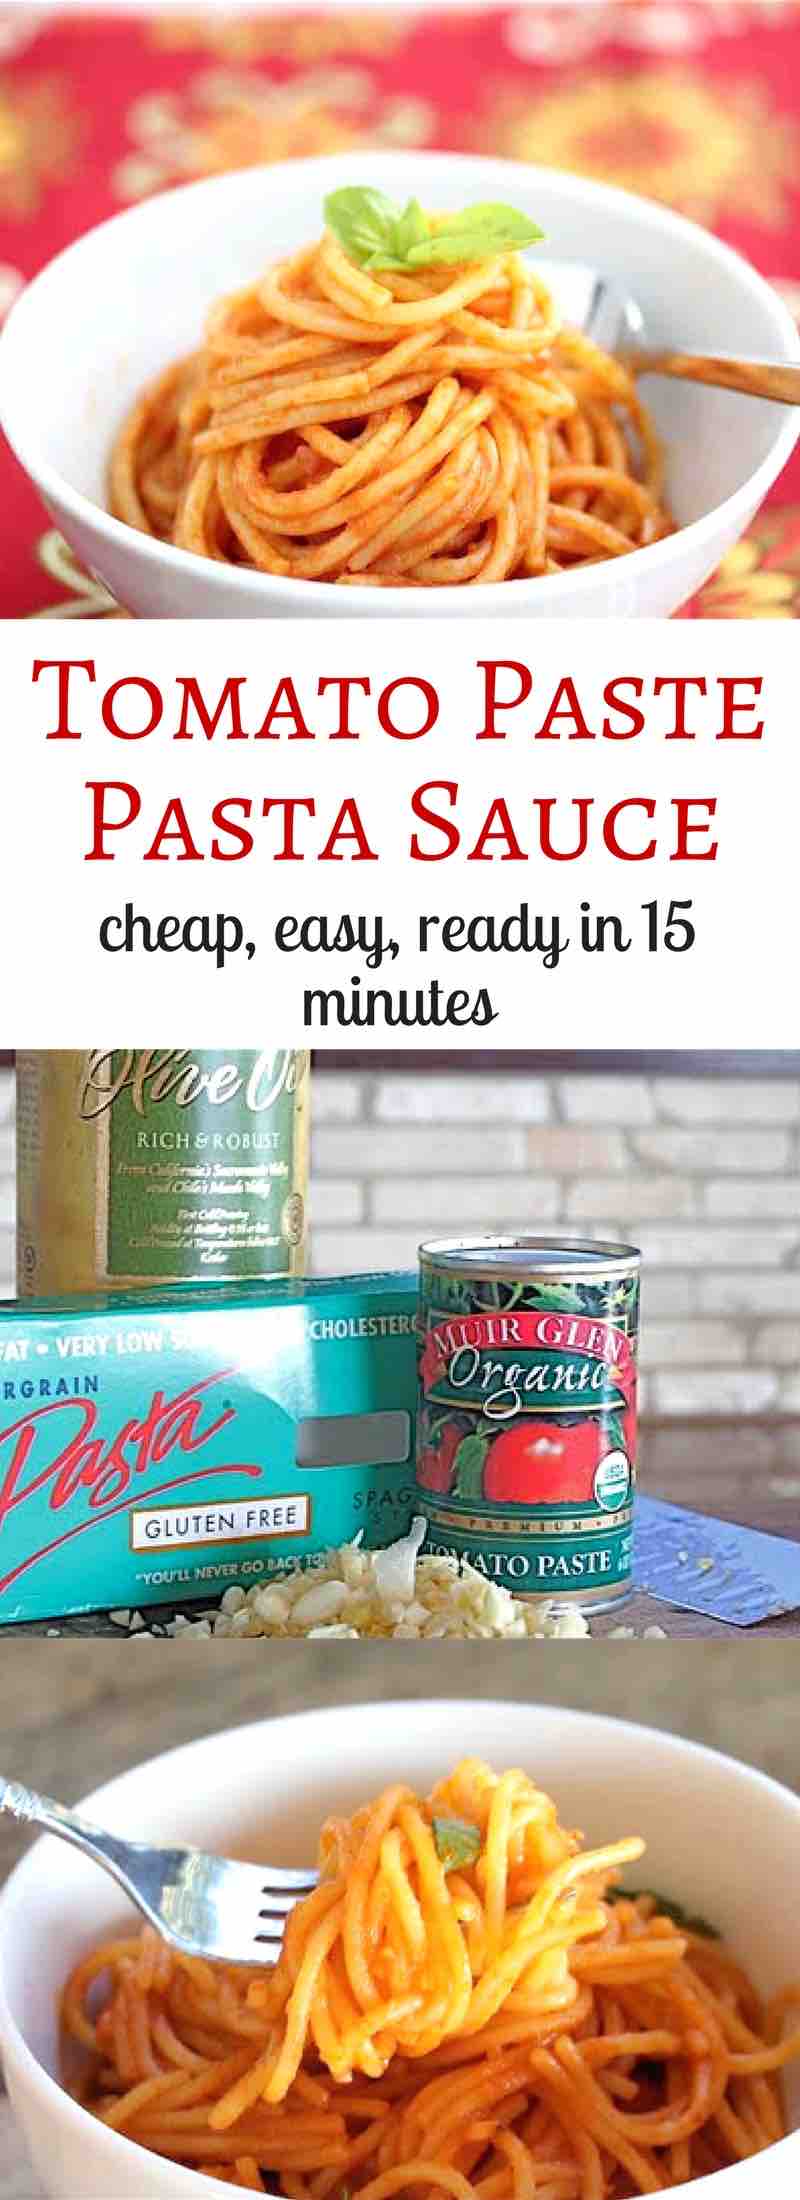 Tomato Paste Pasta - this recipe has only 4 ingredients - super easy, super quick, perfect for nights when you have no idea what to make for dinner